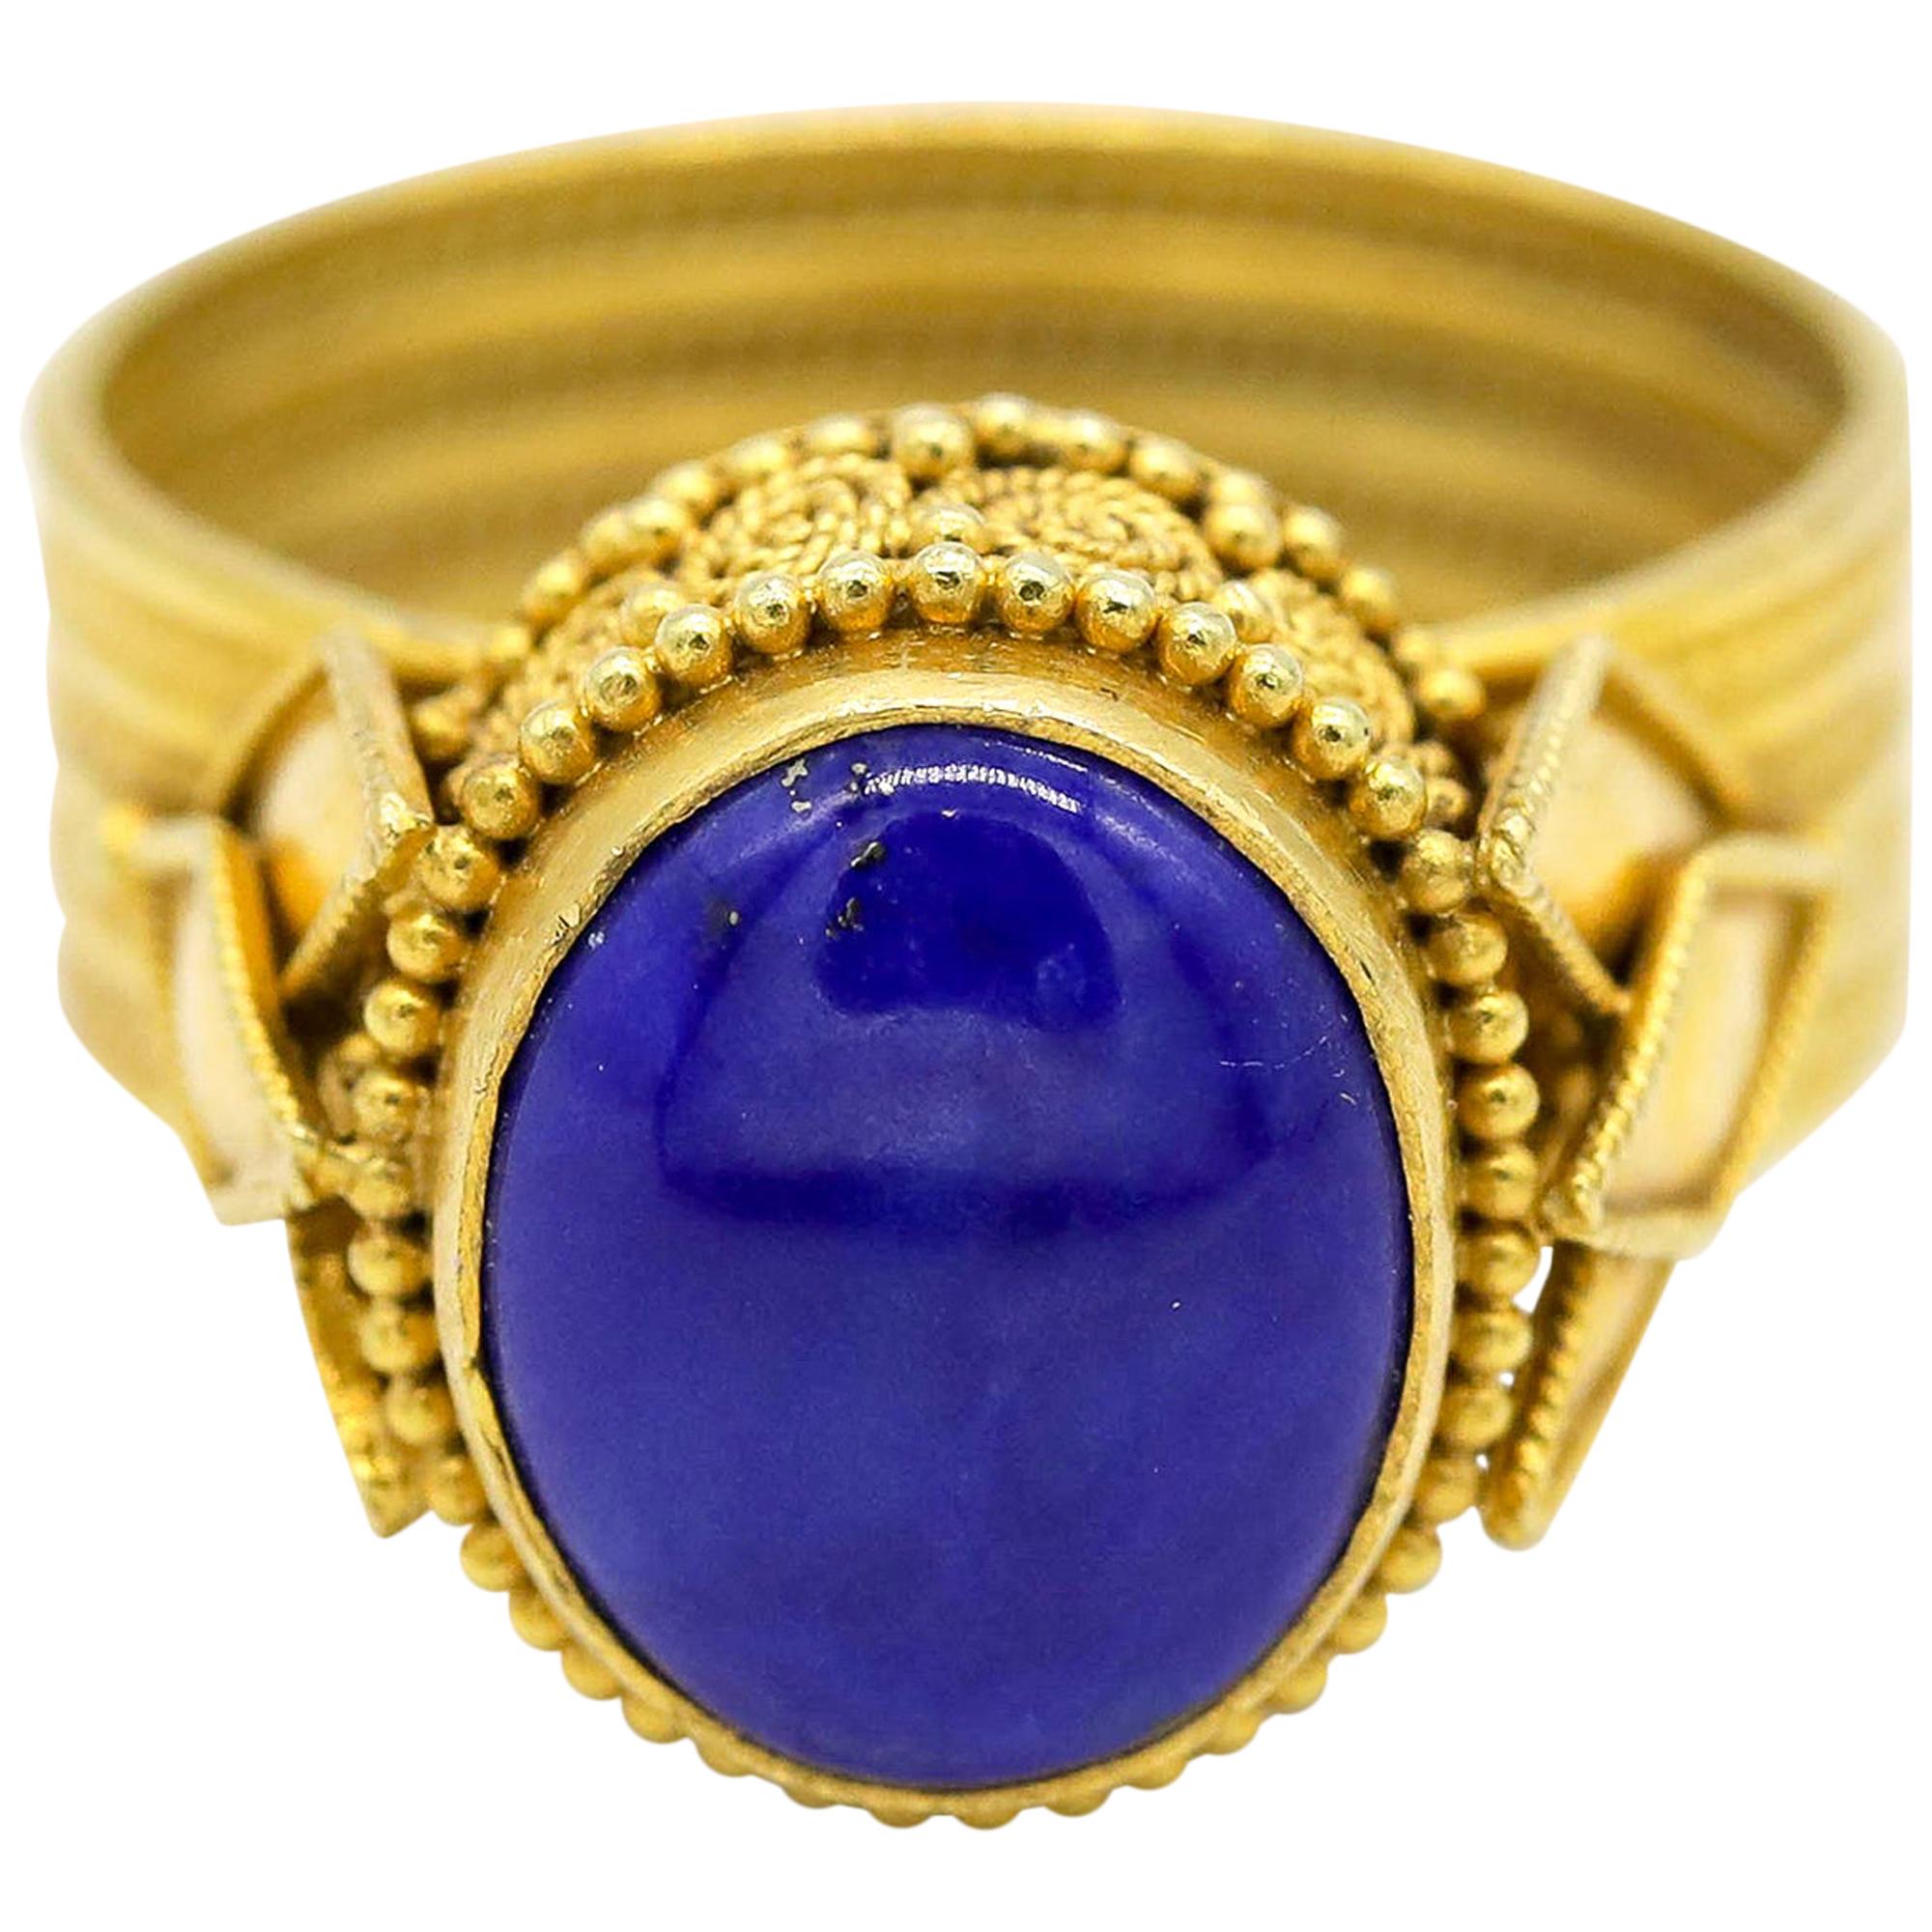 Blue Cabochon Oval Shape Gemstone 22 Karat Yellow Gold Ring 

Gemstone has a long and fascinating history of being highly coveted and prized as a very special and unique gemstones. This rare, -carat blue Cabochon Oval Gemstone, possesses a delicate